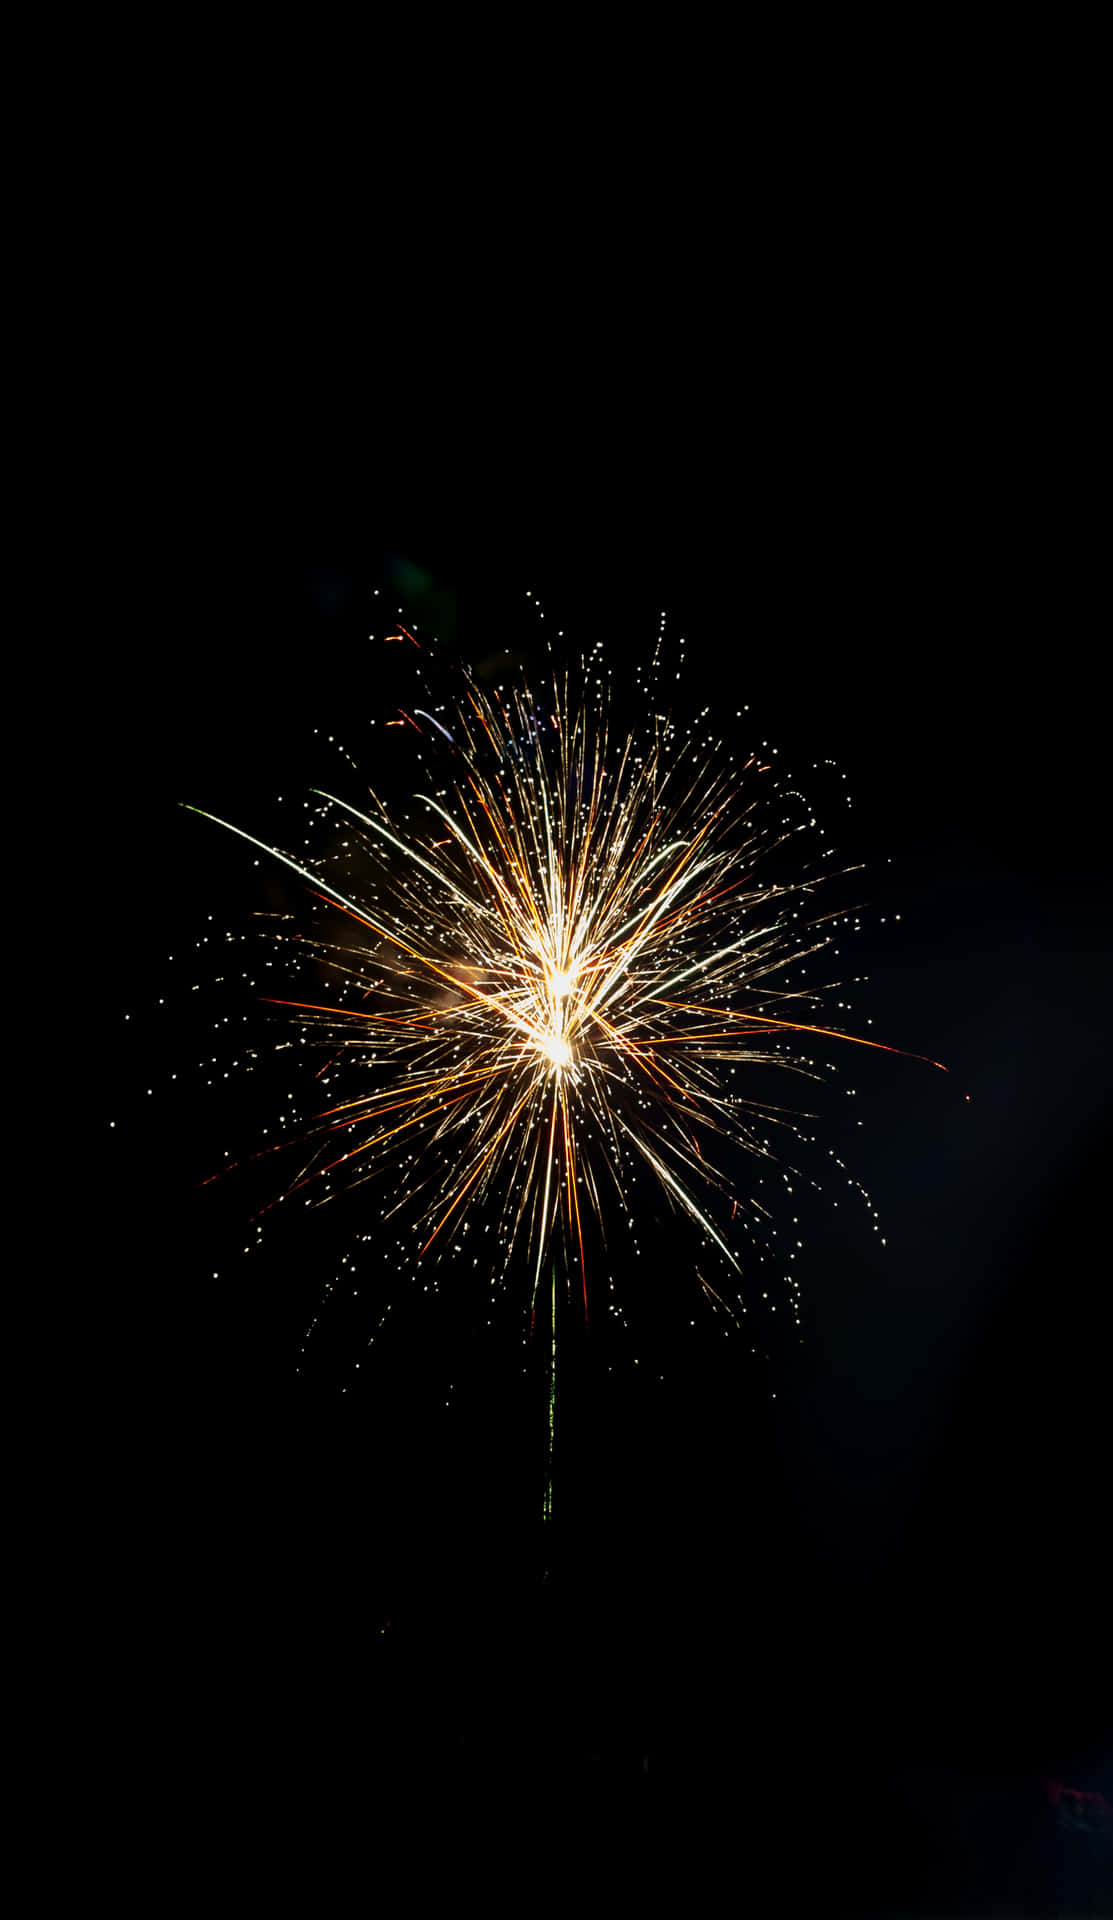 One Golden Fireworks Picture